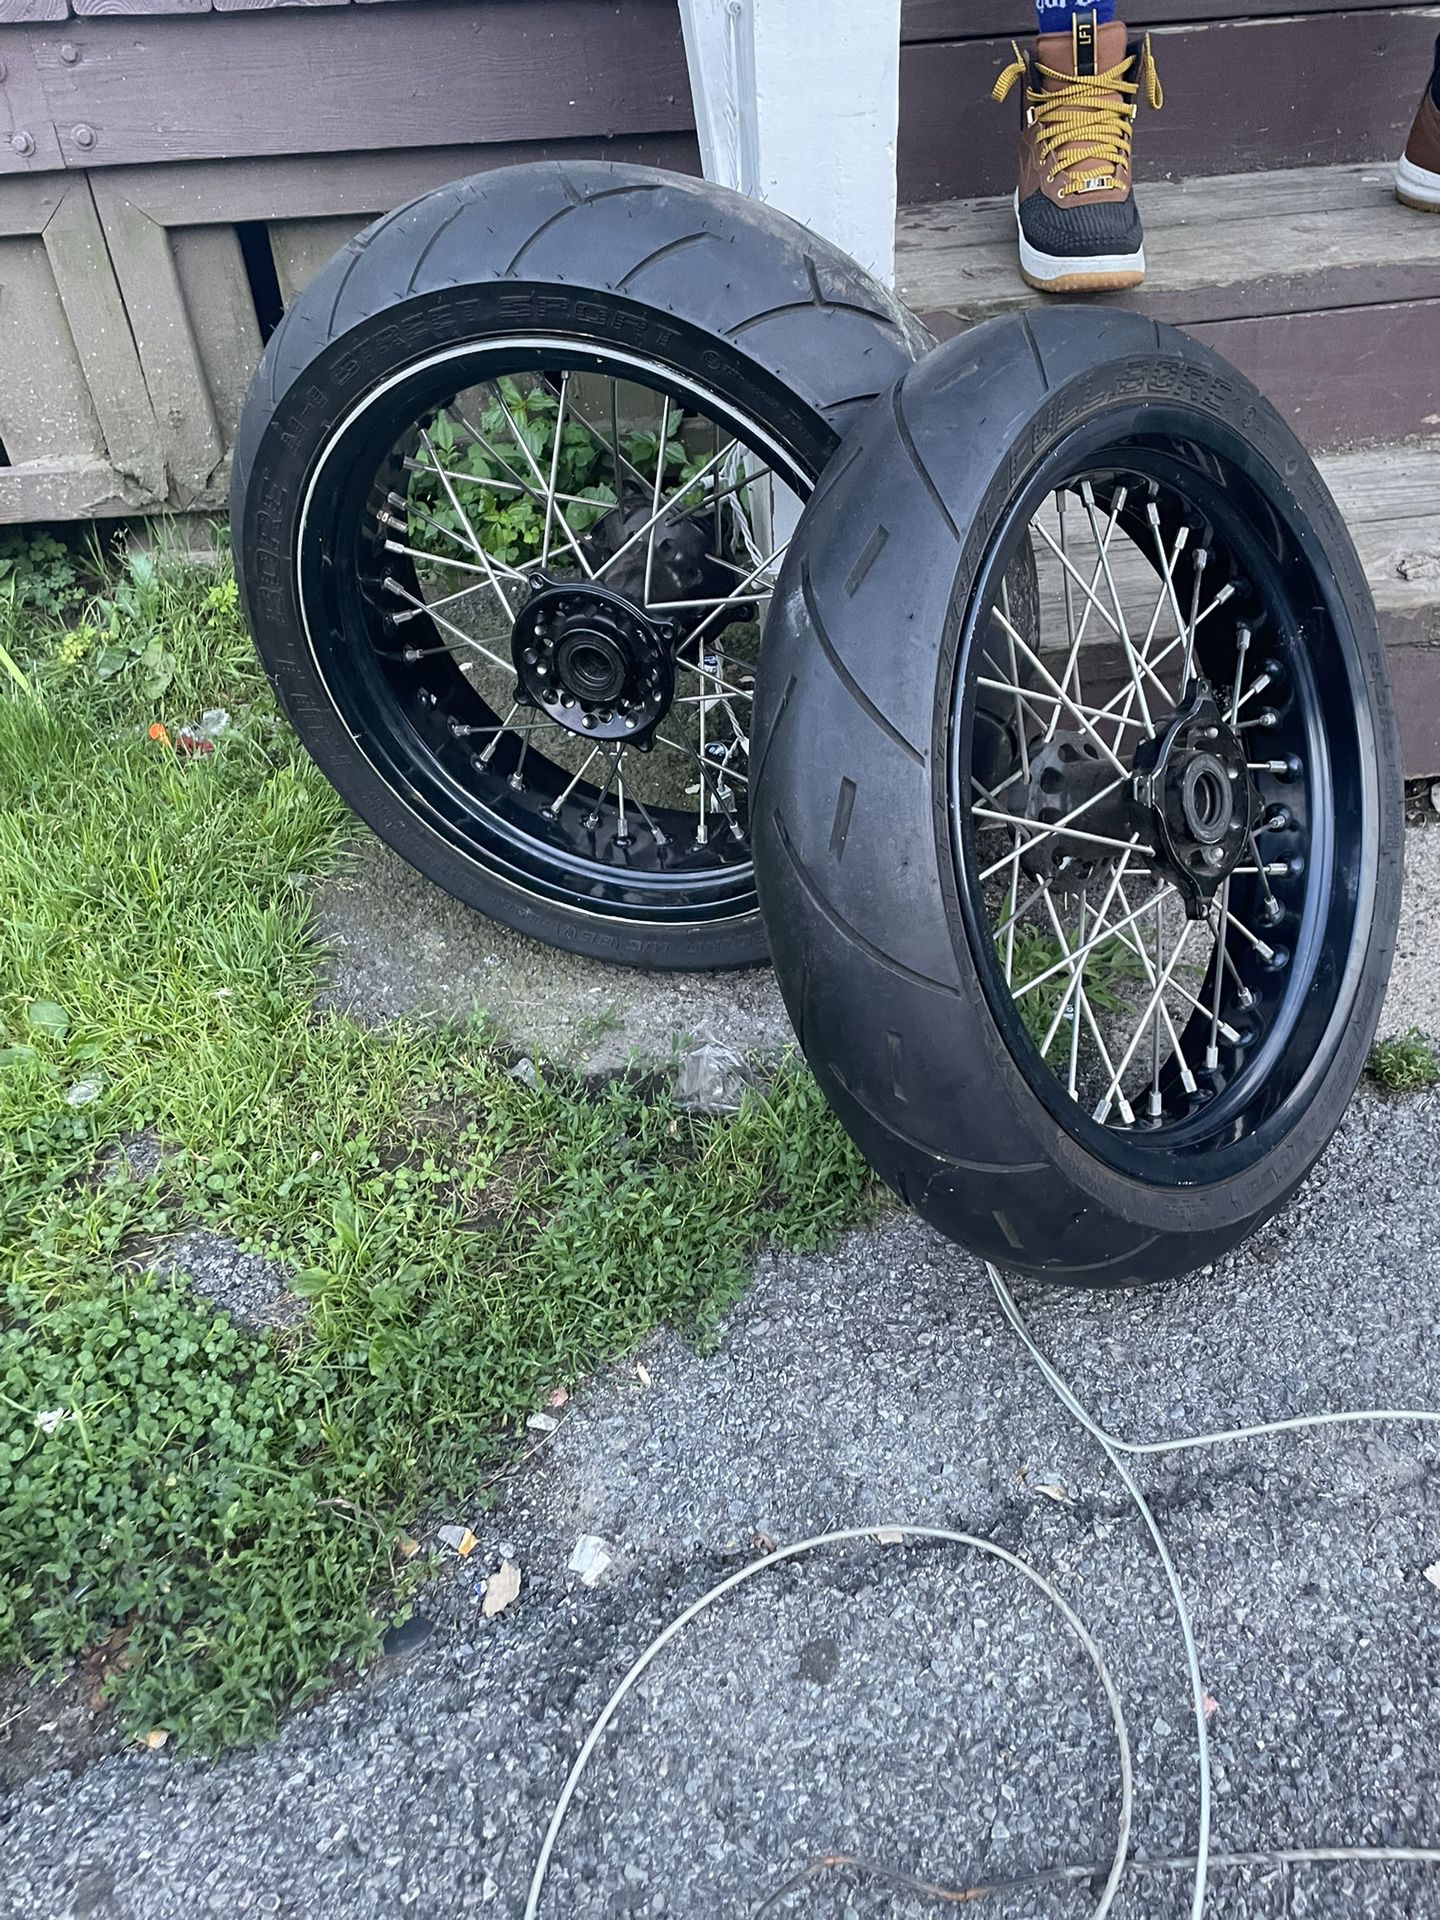  Súper moto Wheels With Brand New Tires